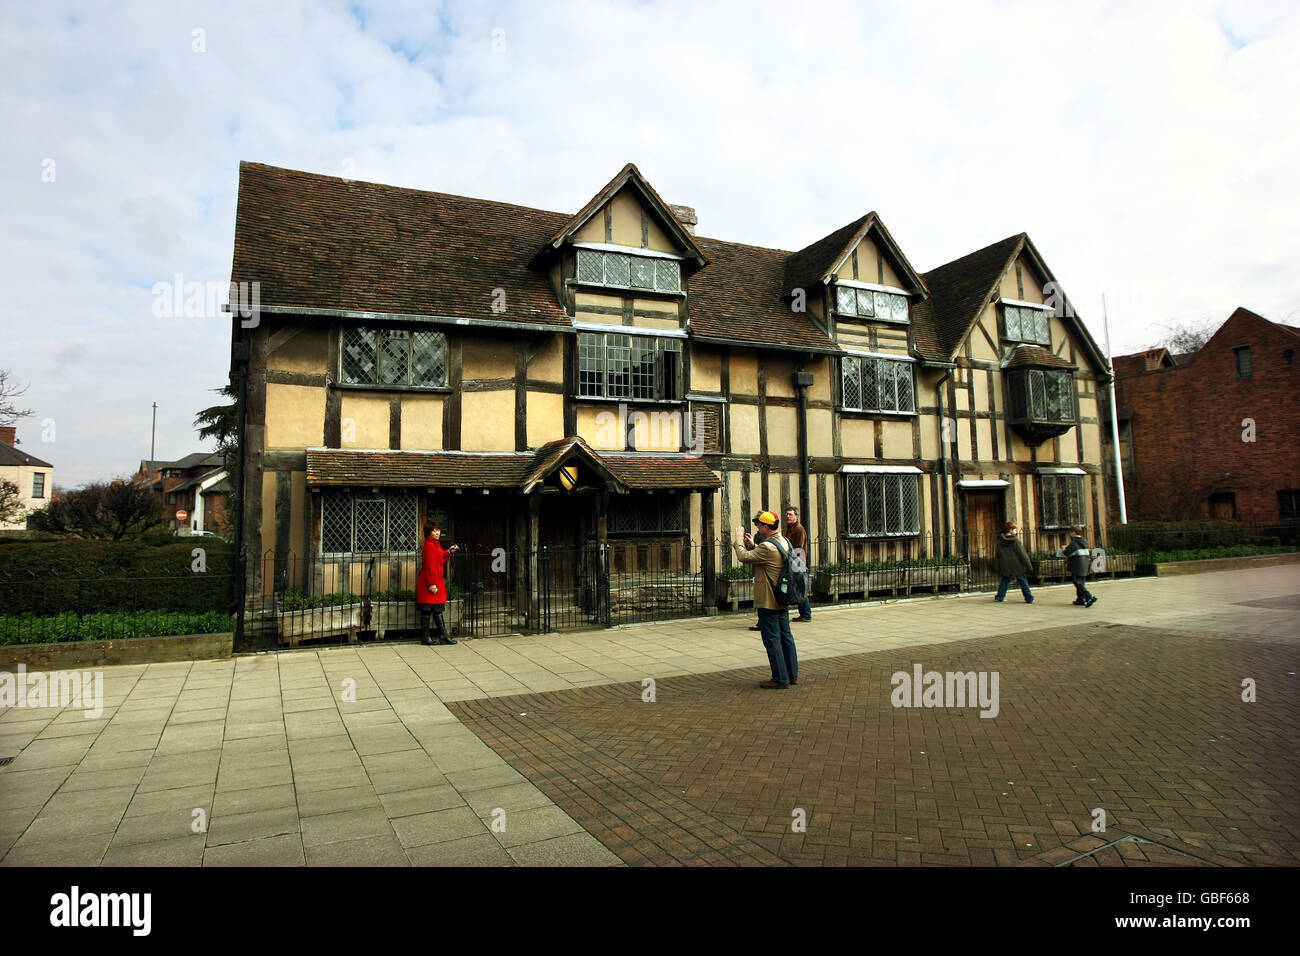 William Shakespeare's birthplace in Stratford-upon- Avon. Stock Photo